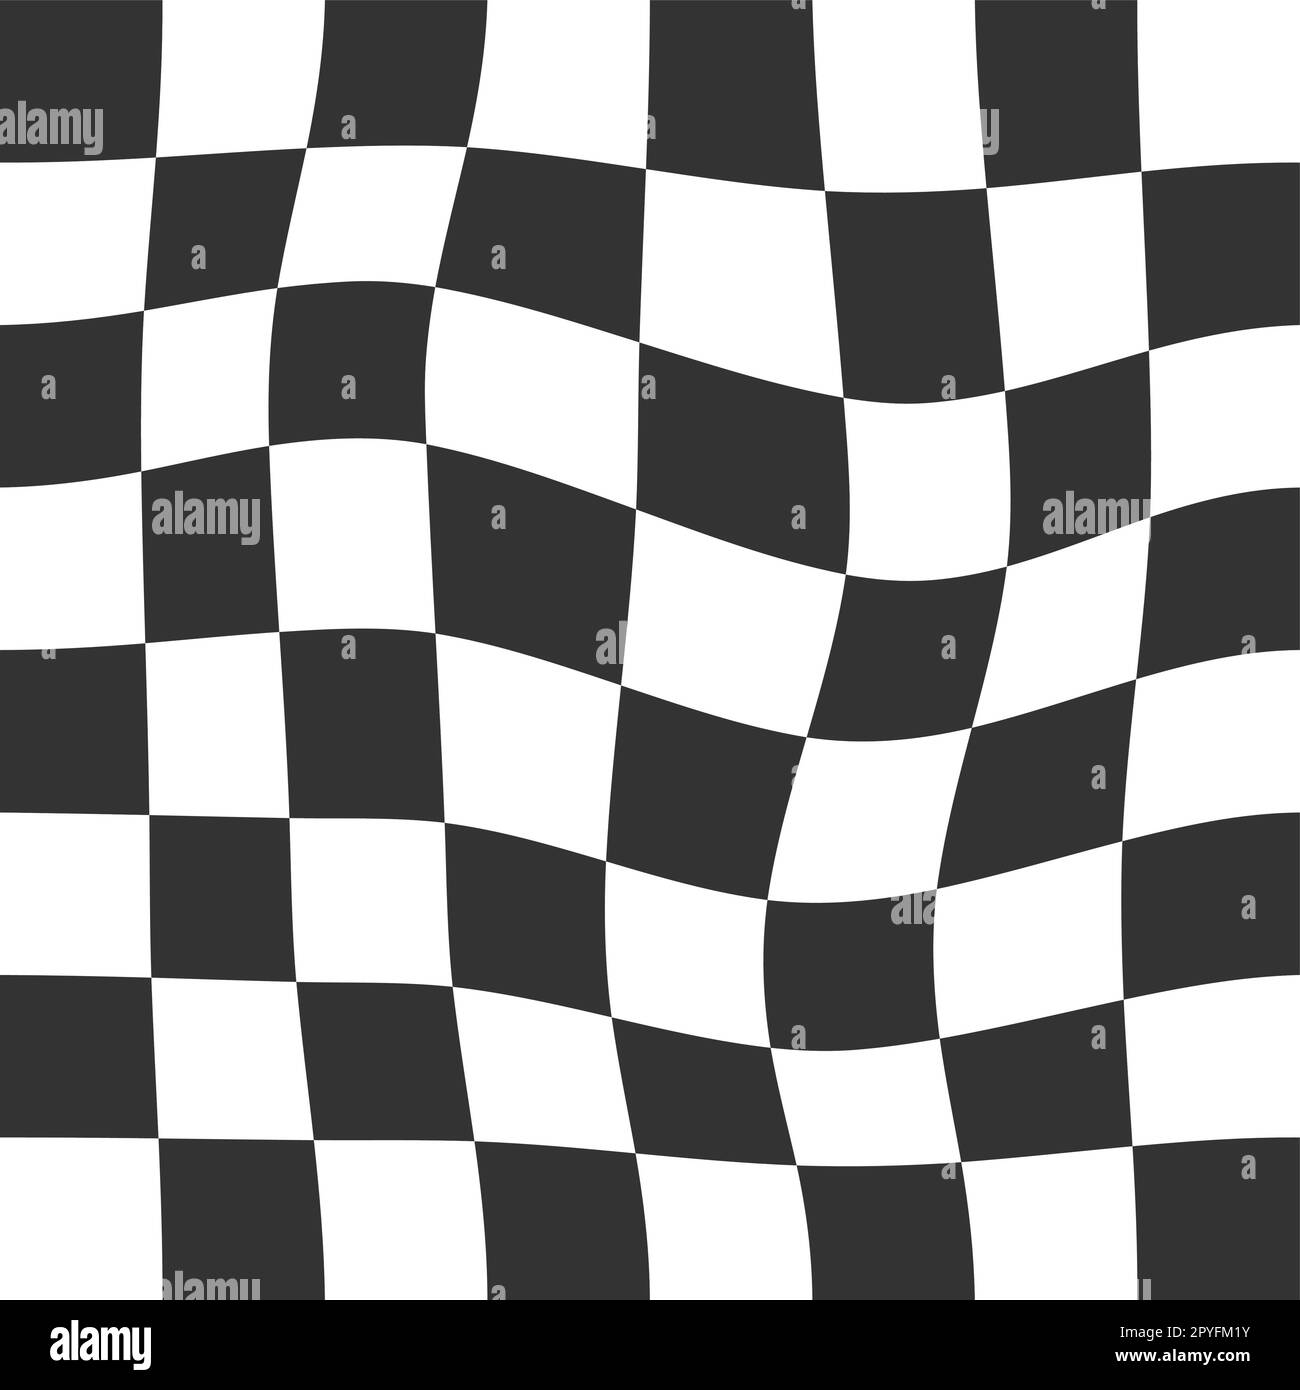 Checkered chess board race background wallpaper Vector Image